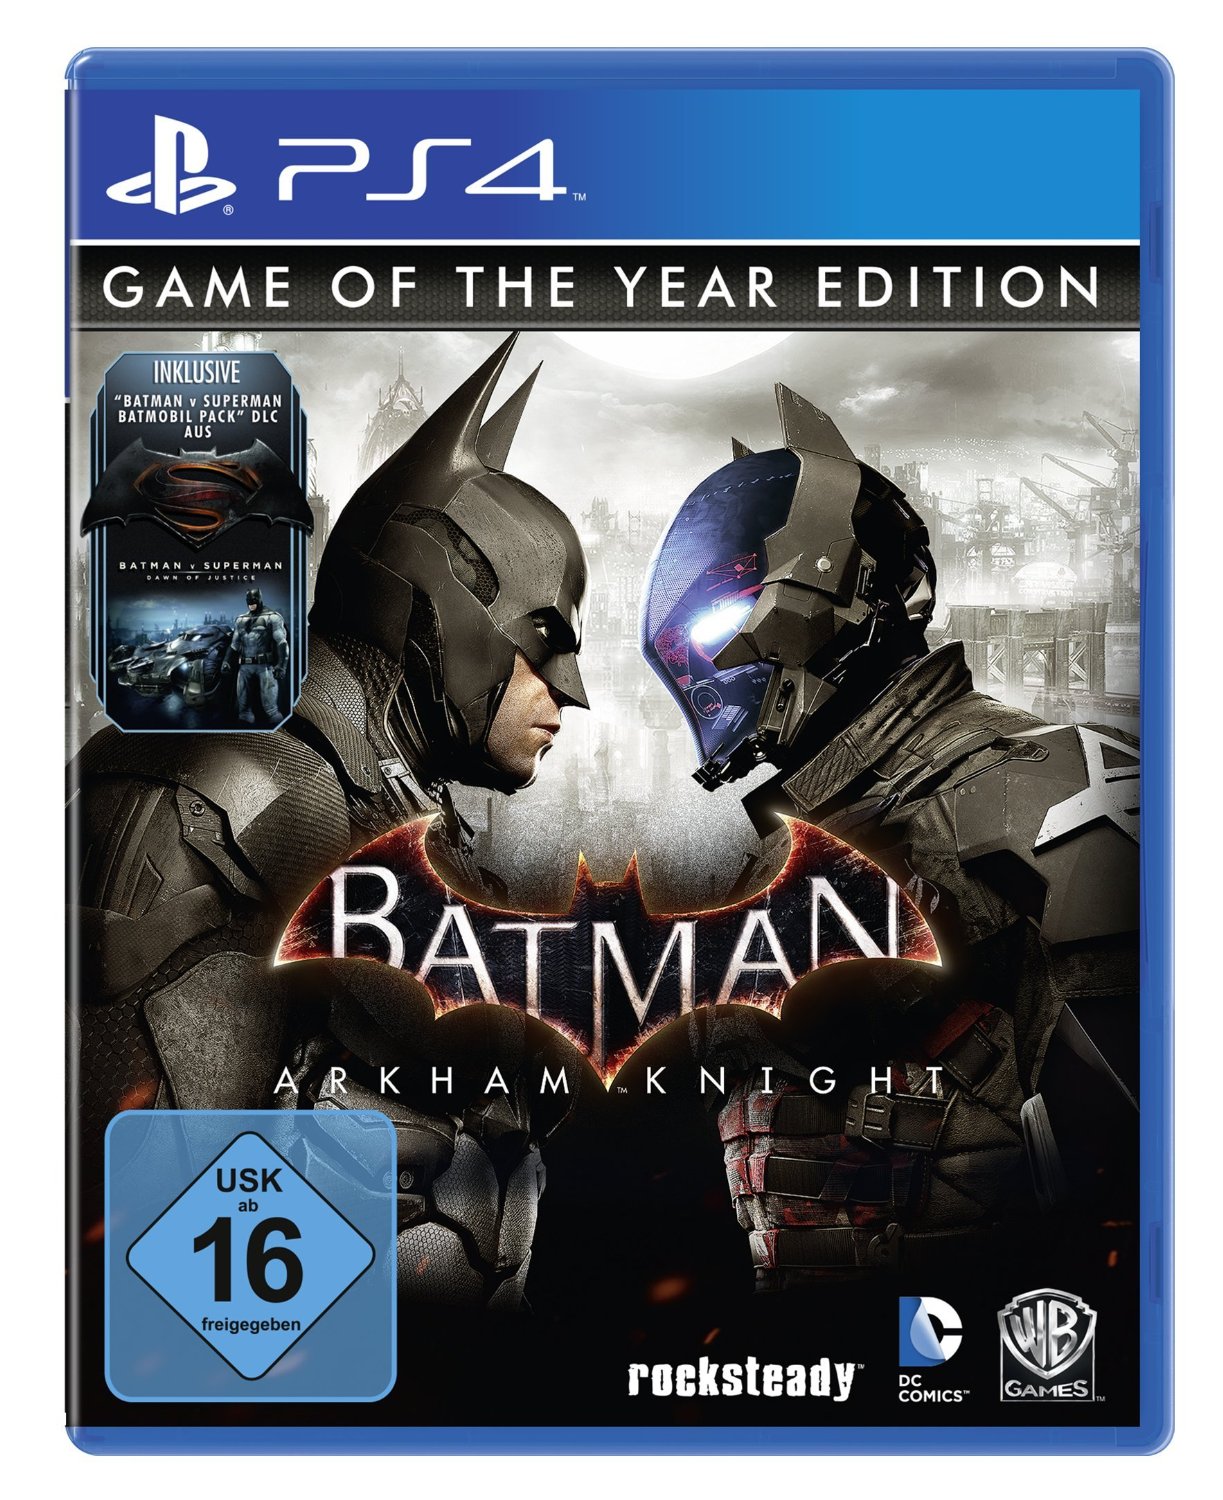 Batman Knight of Year Edition PS4, XB1 Listed